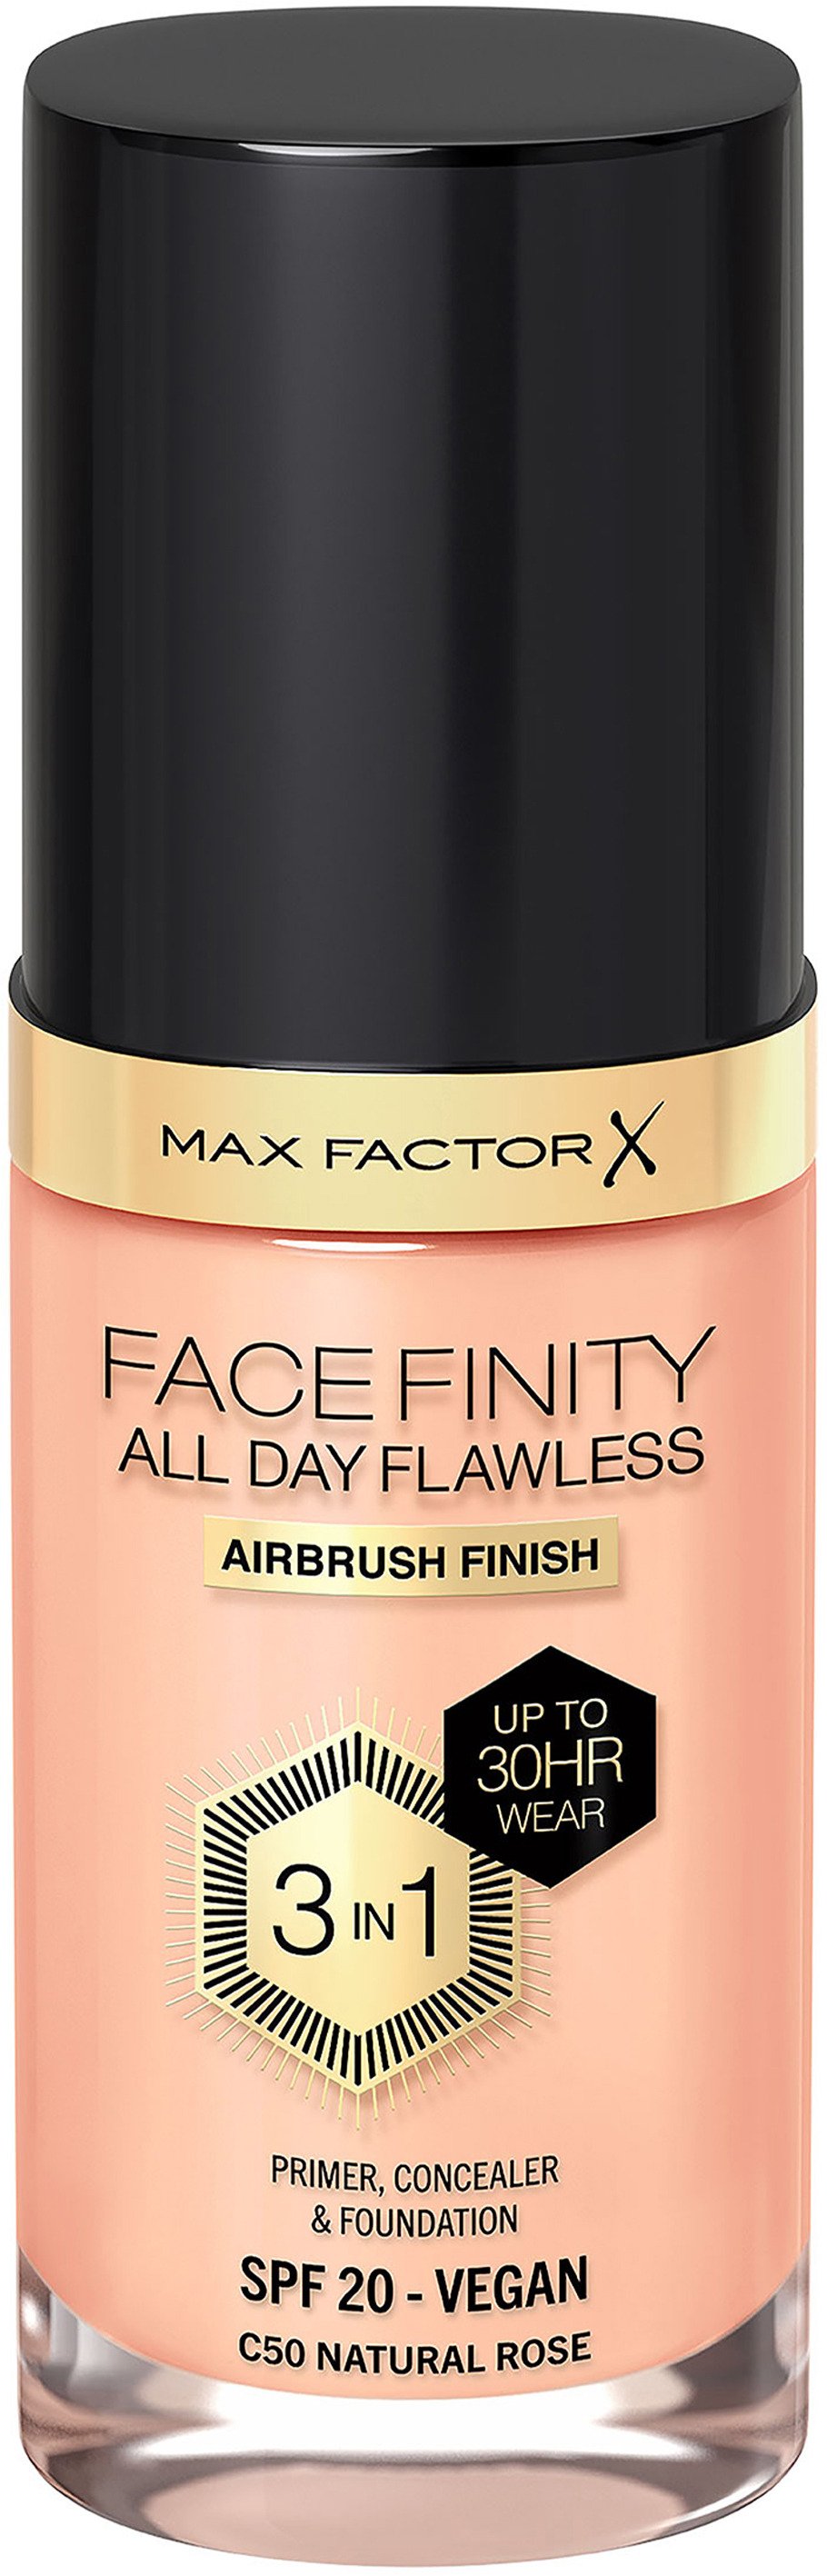 Max Factor Face Finity All Day Flawless 3in1 Foundation 050 Natural Rose 30 ml